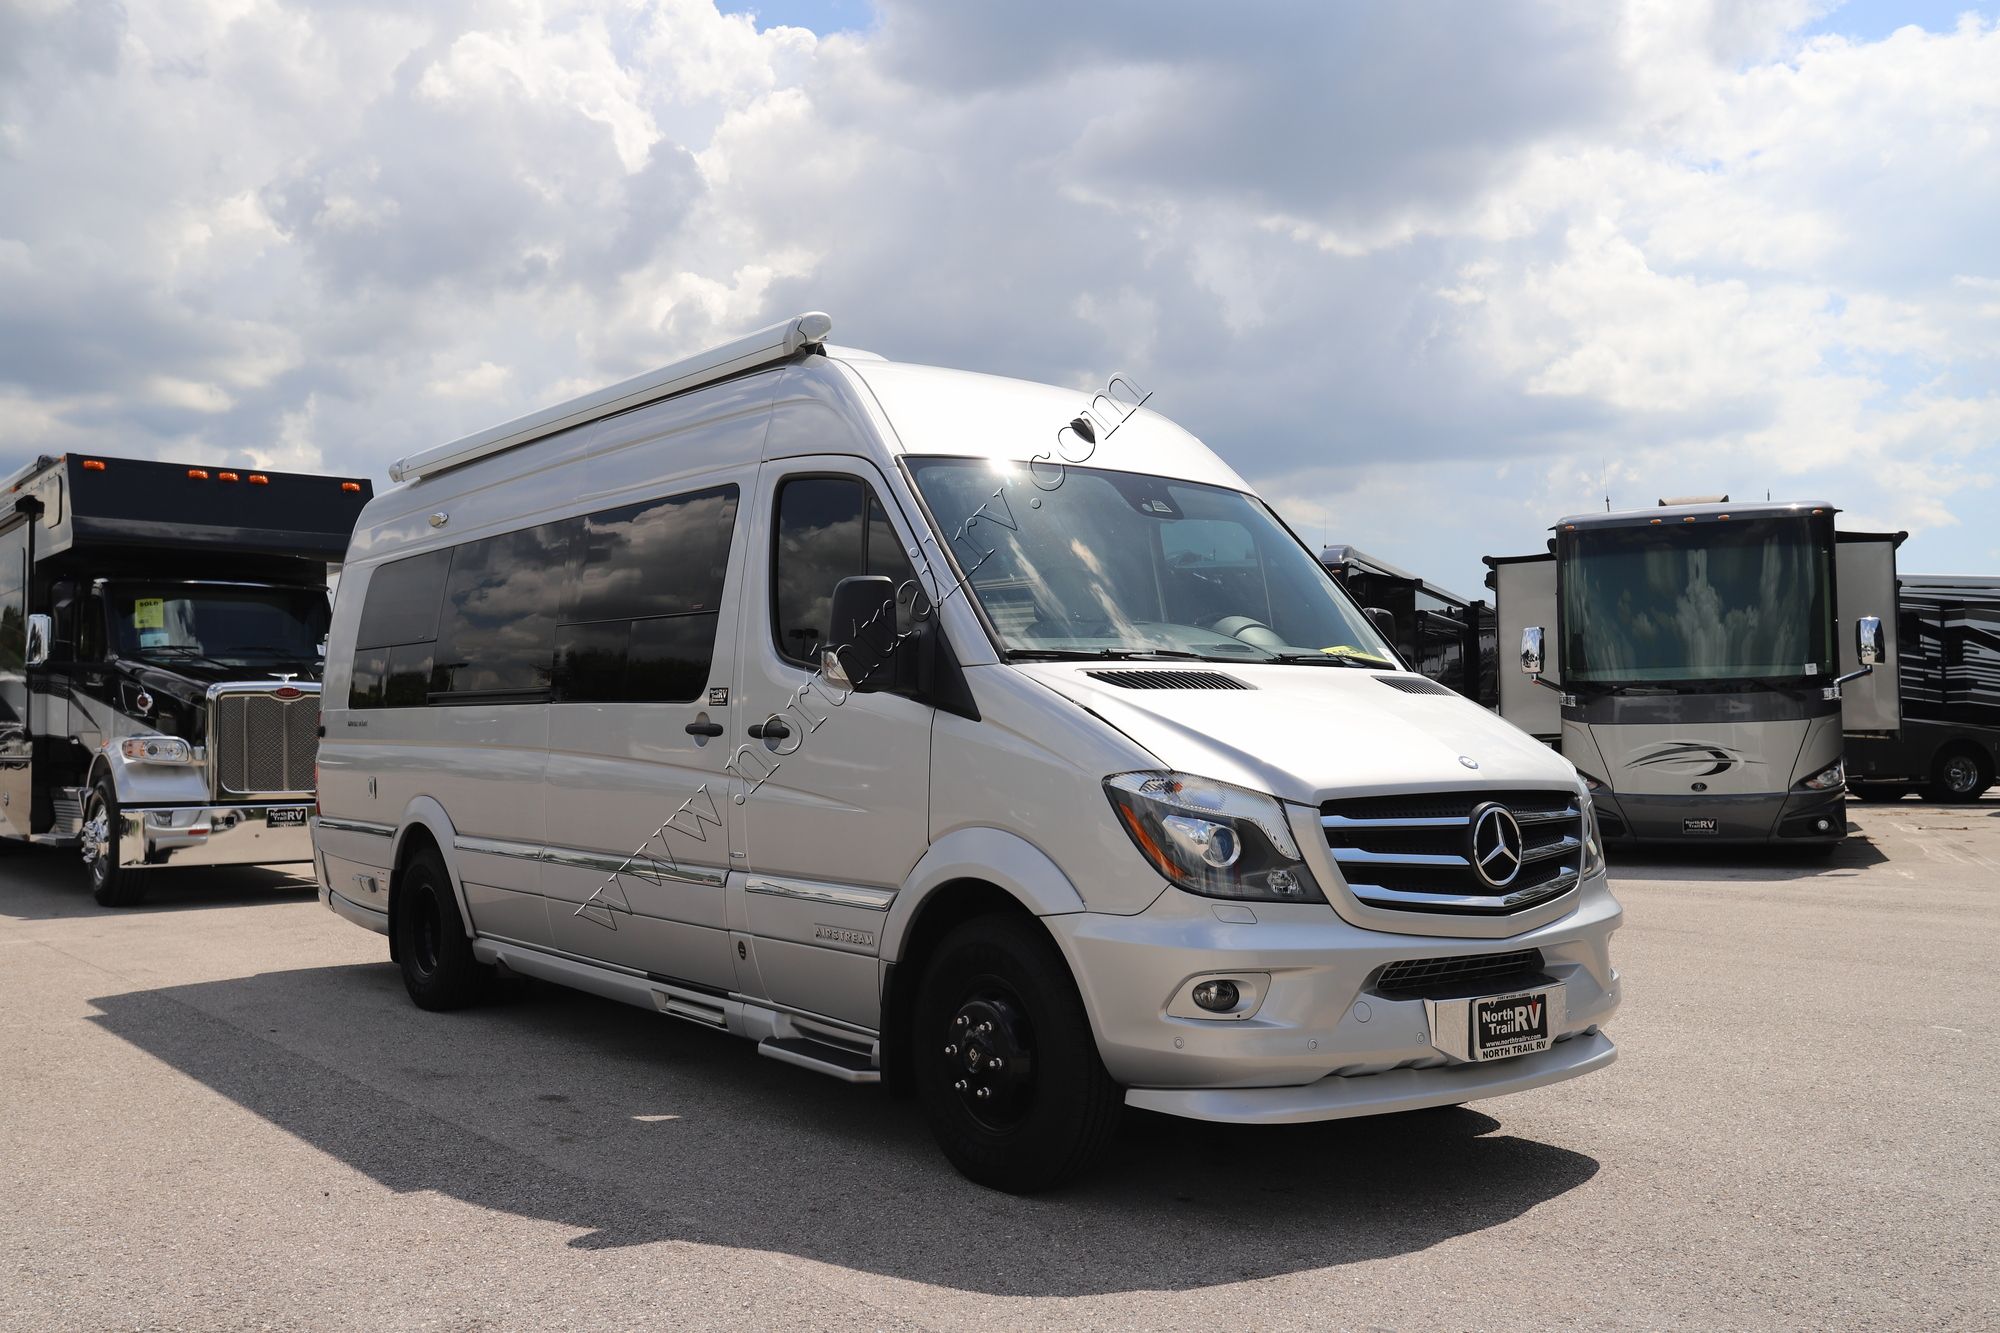 Used 2015 Airstream Interstate LOUNGE Class B  For Sale